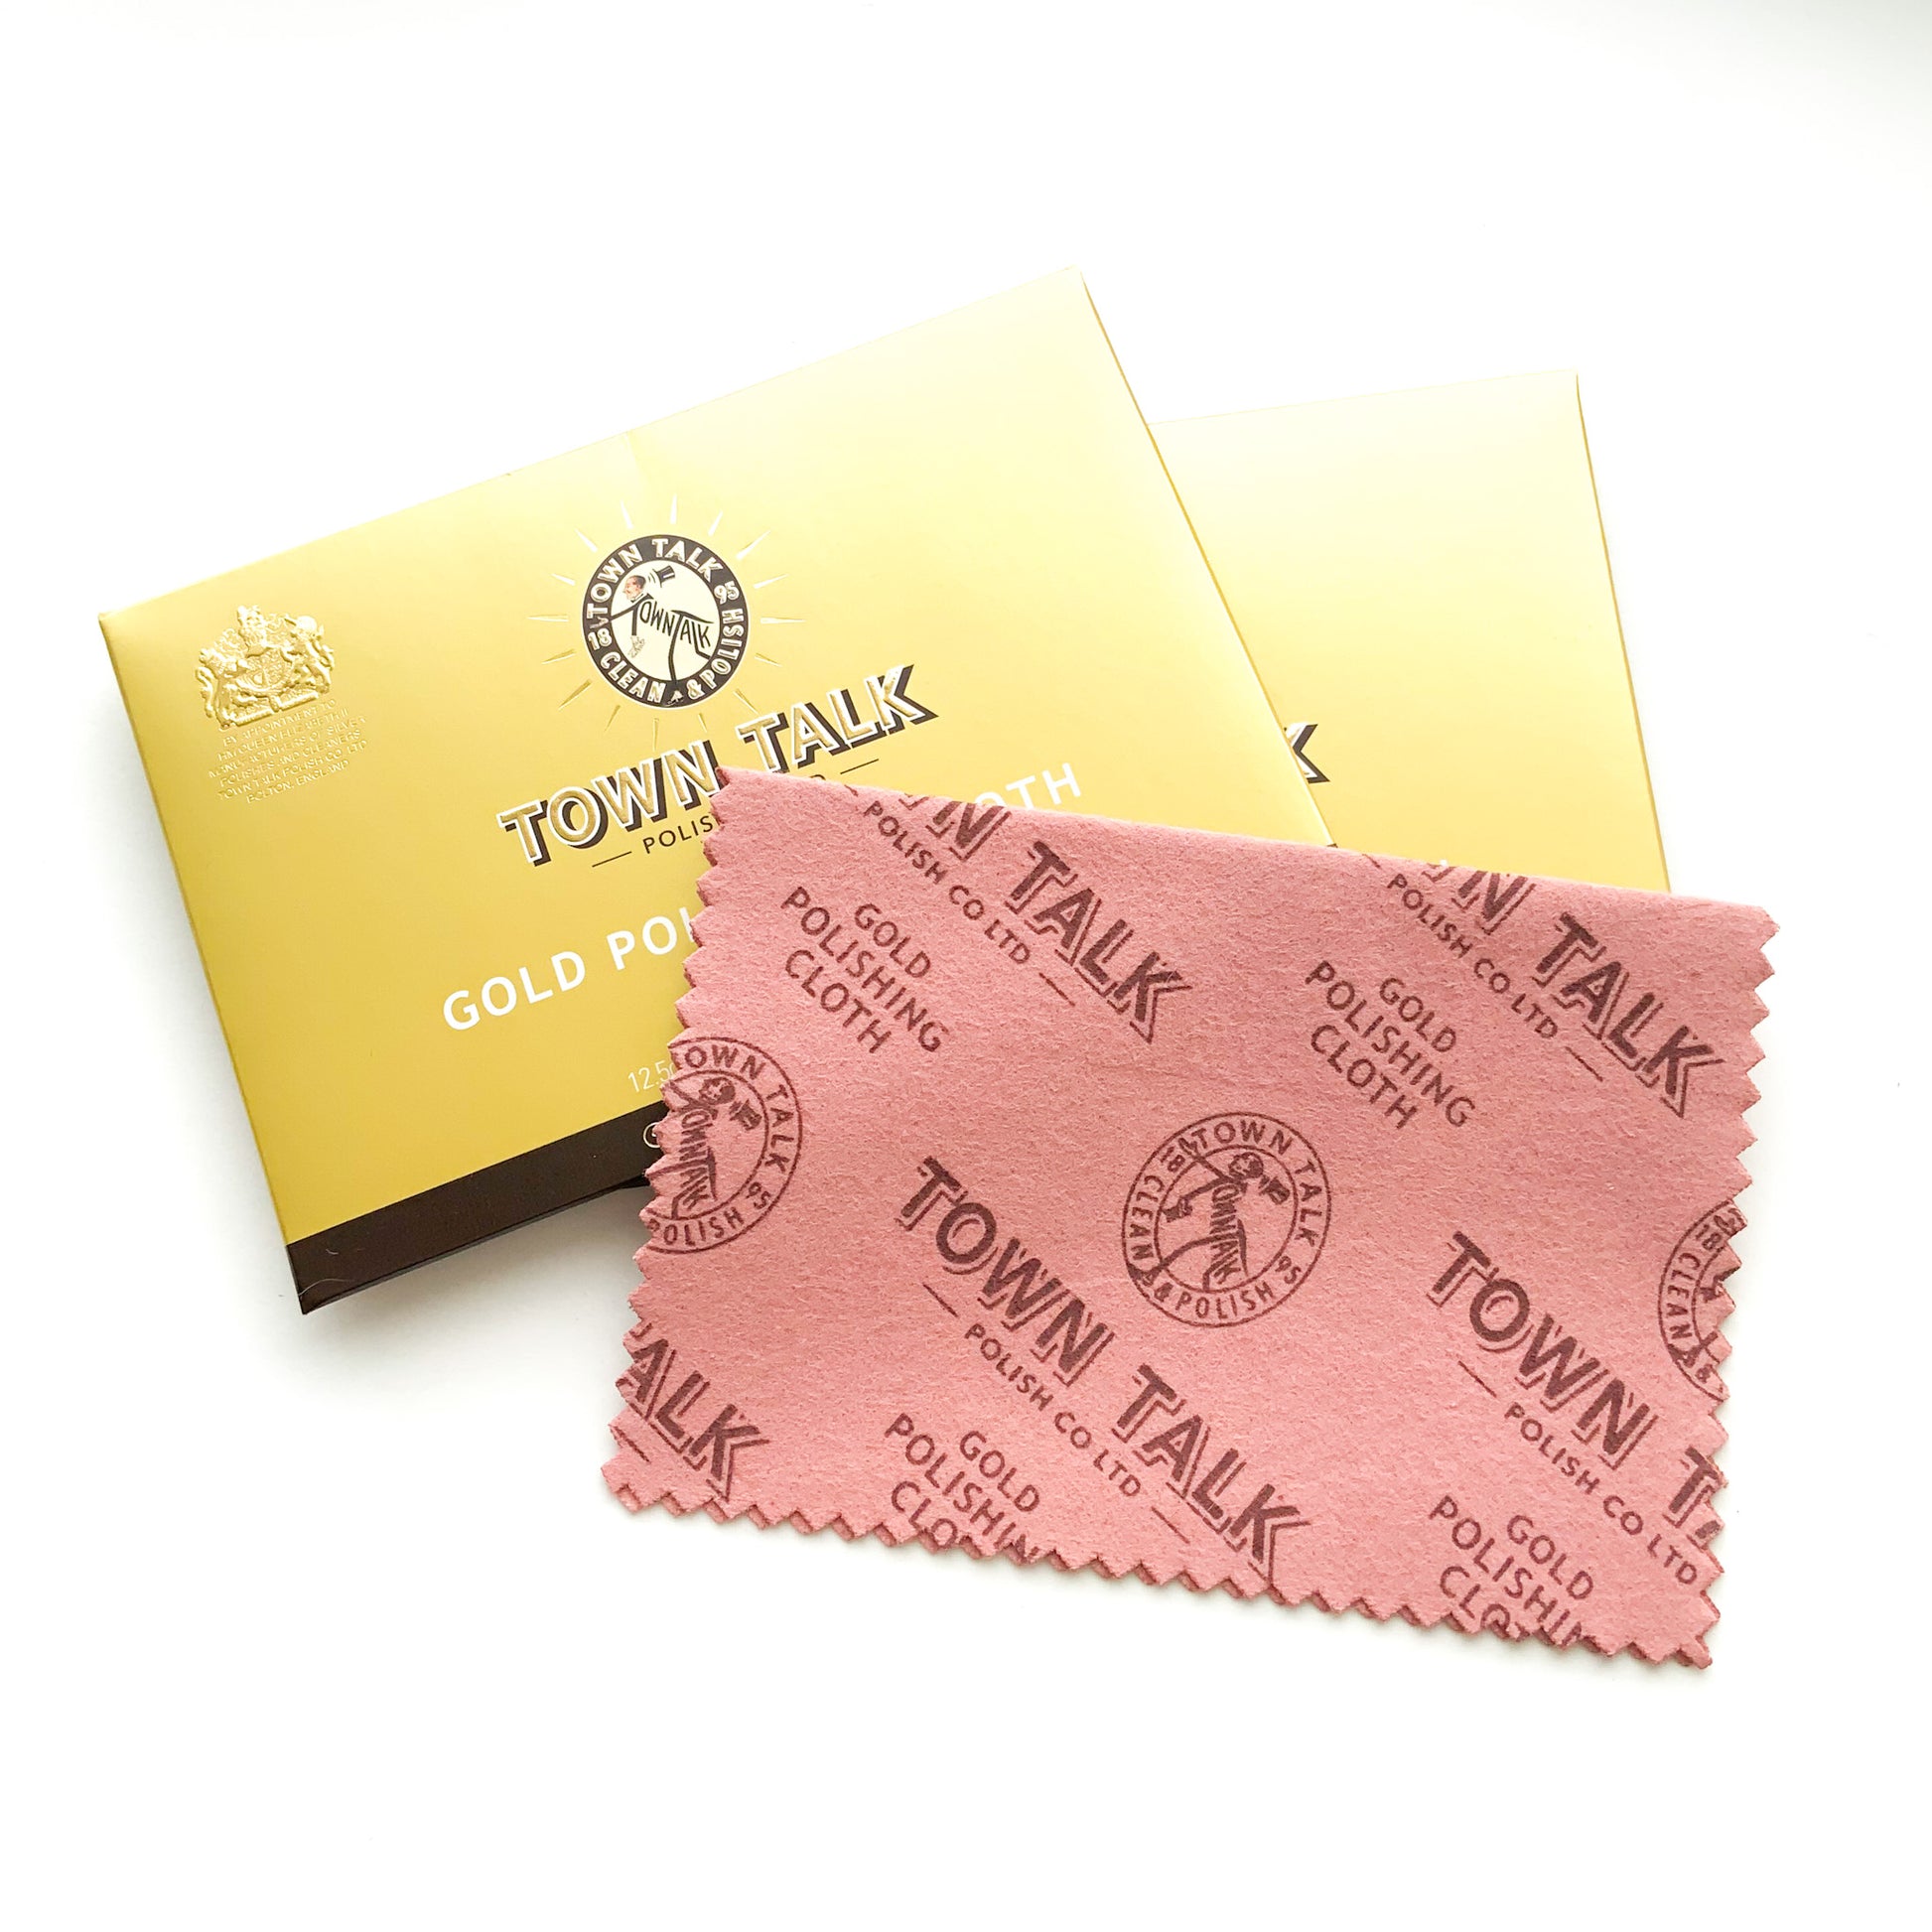 Gold polishing cloth included with all jewellery orders